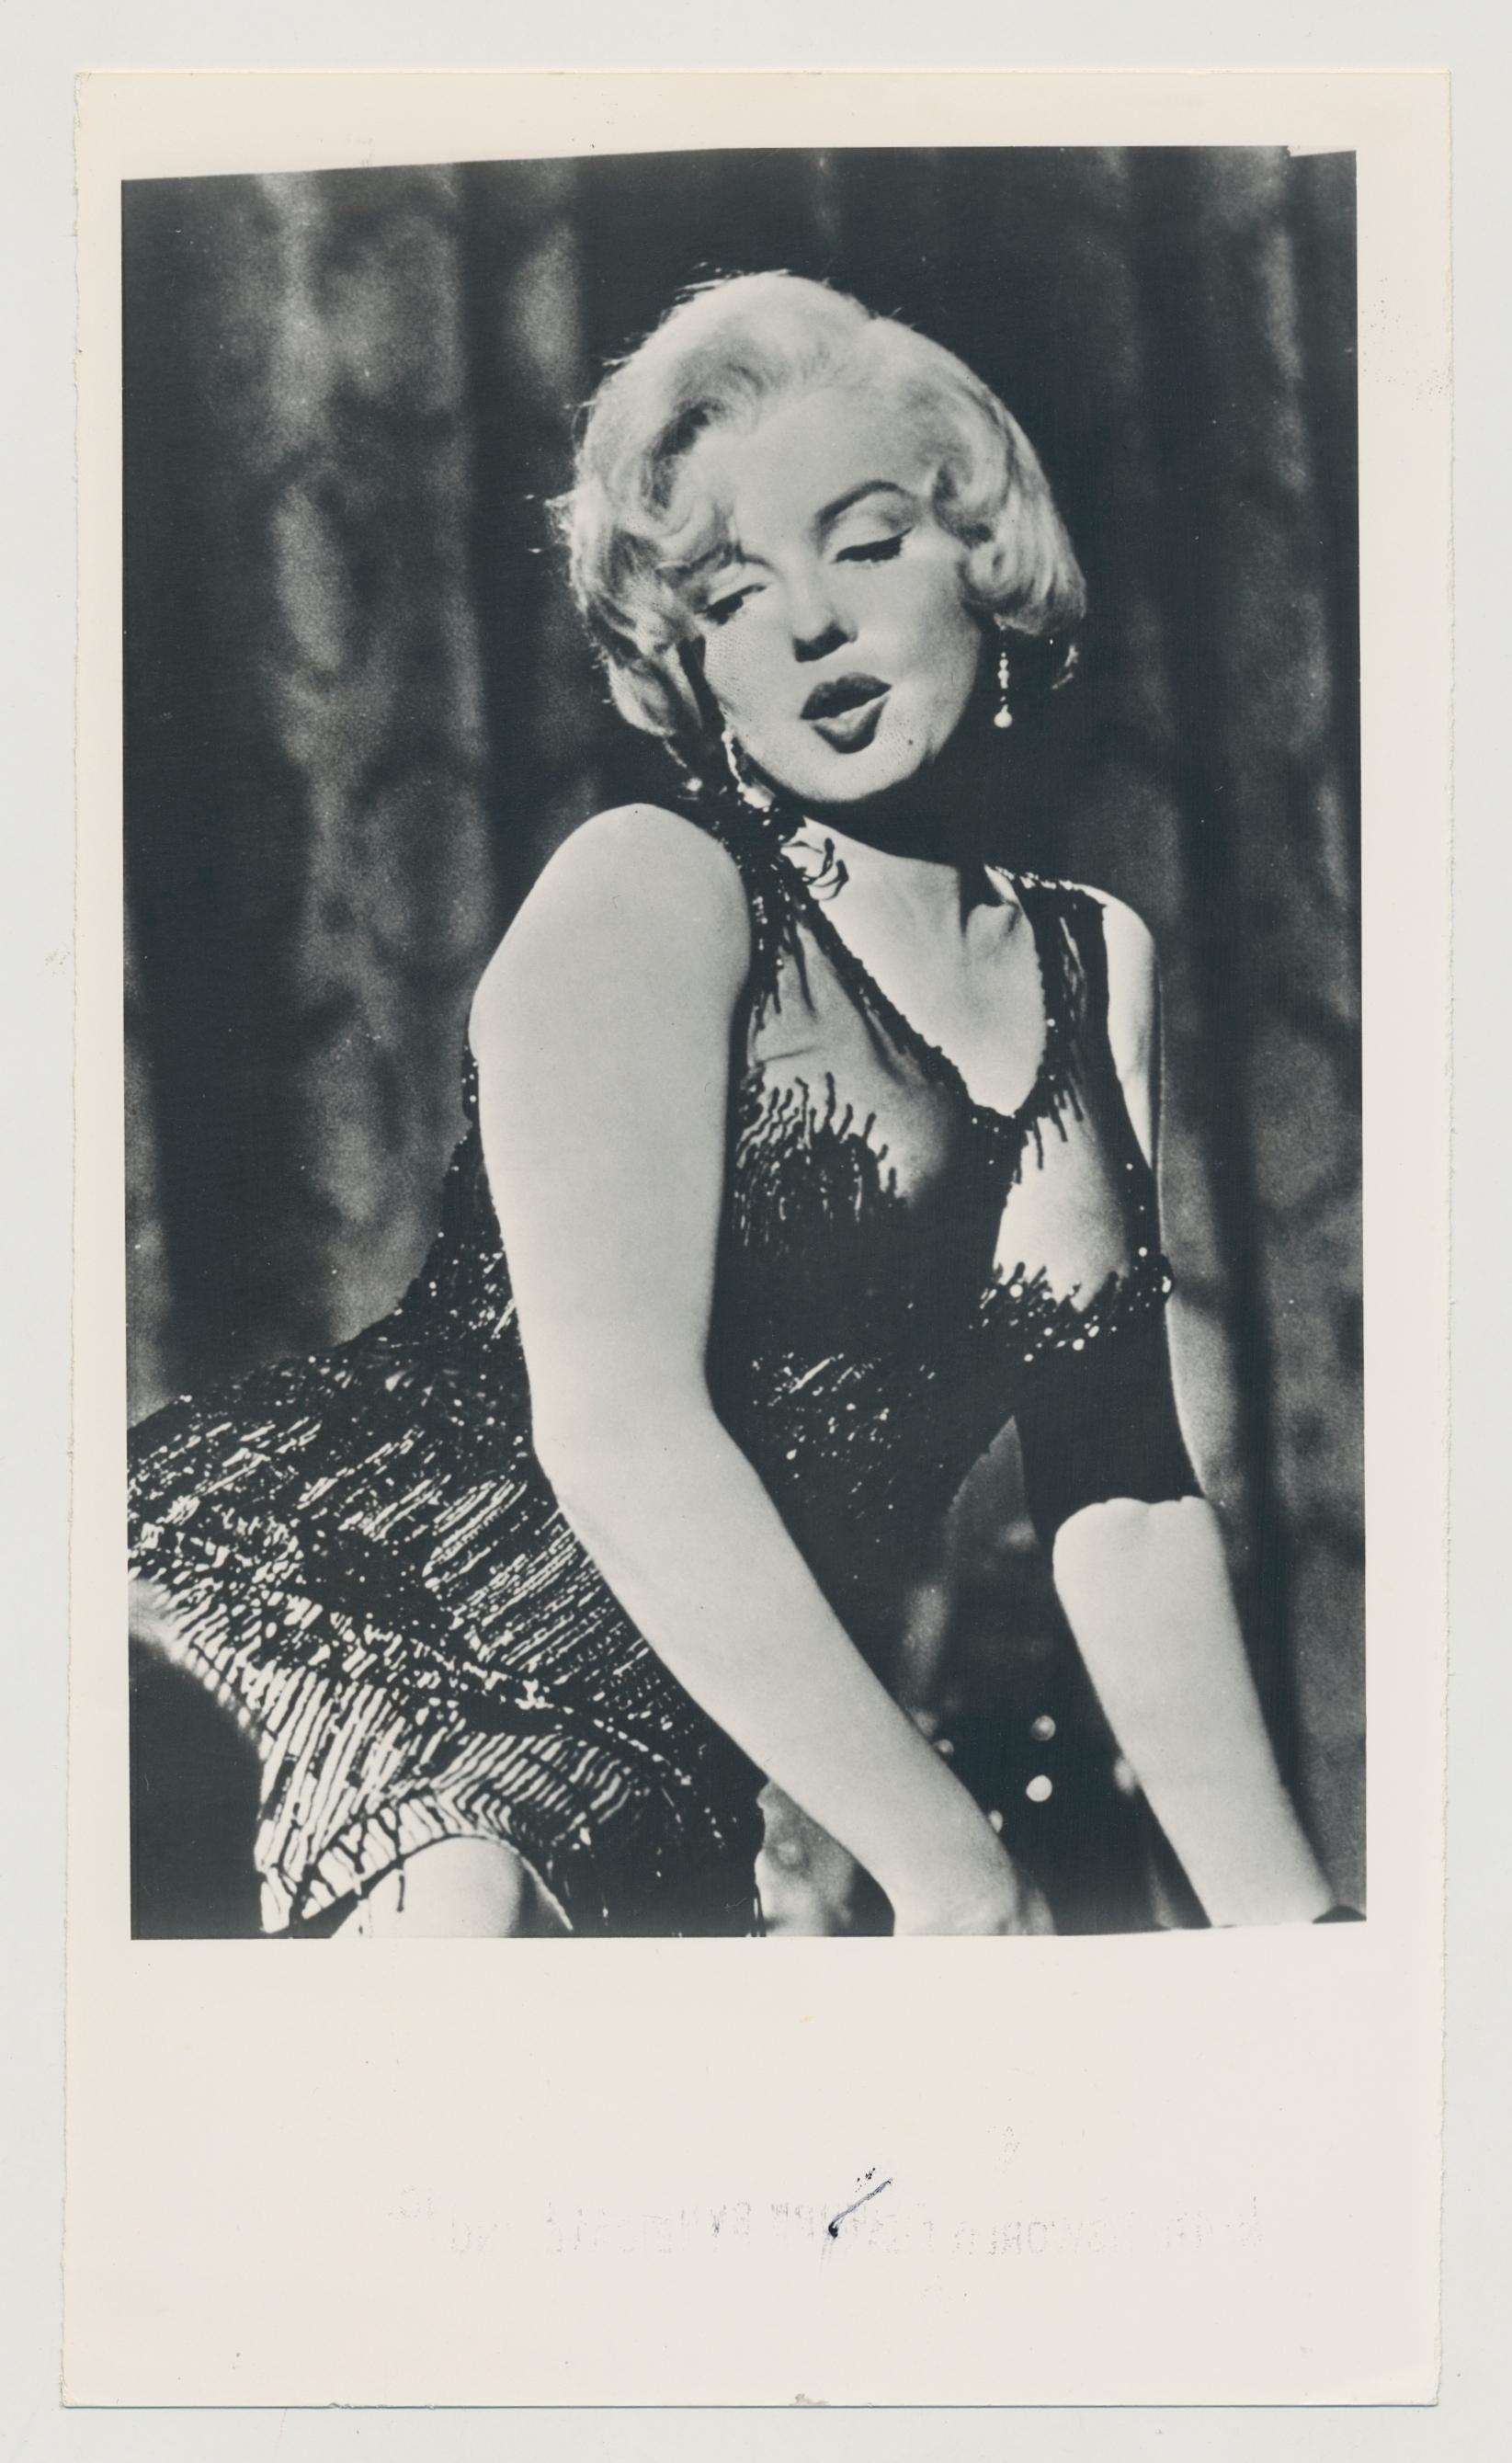 Unknown Portrait Photograph - Marilyn Monroe in "Some like it hot", 1959, 21, 4 x 12, 6 cm